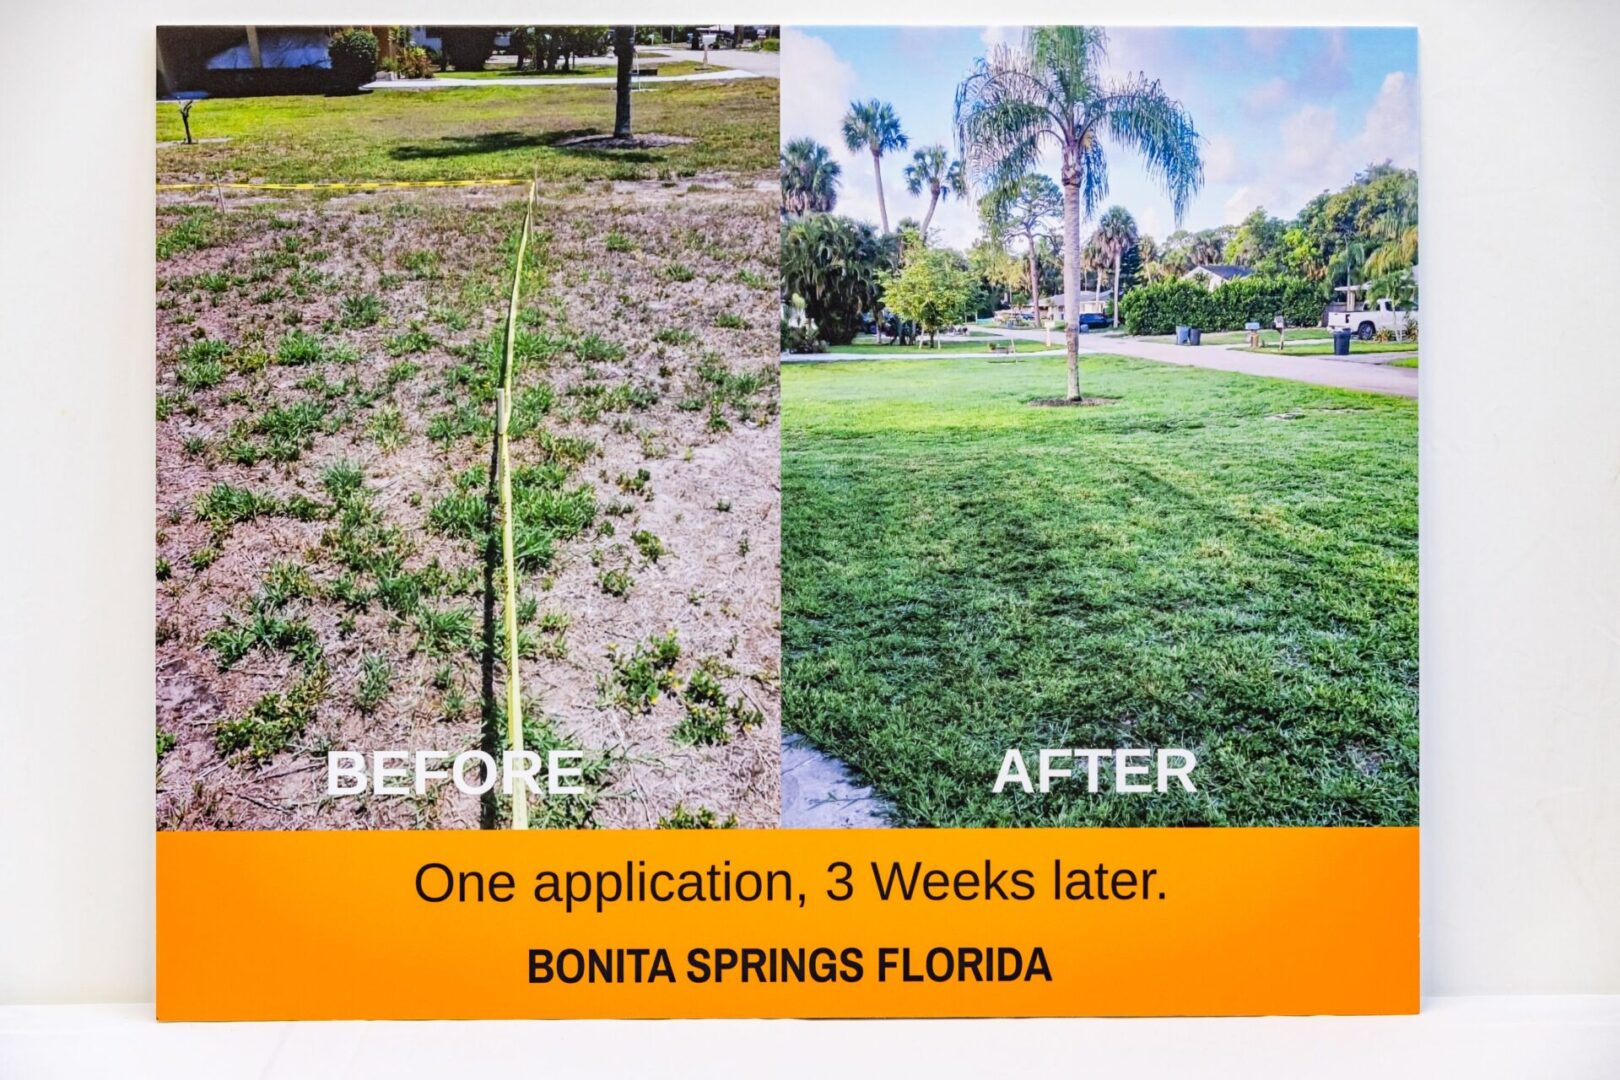 A before and after picture of the same lawn.